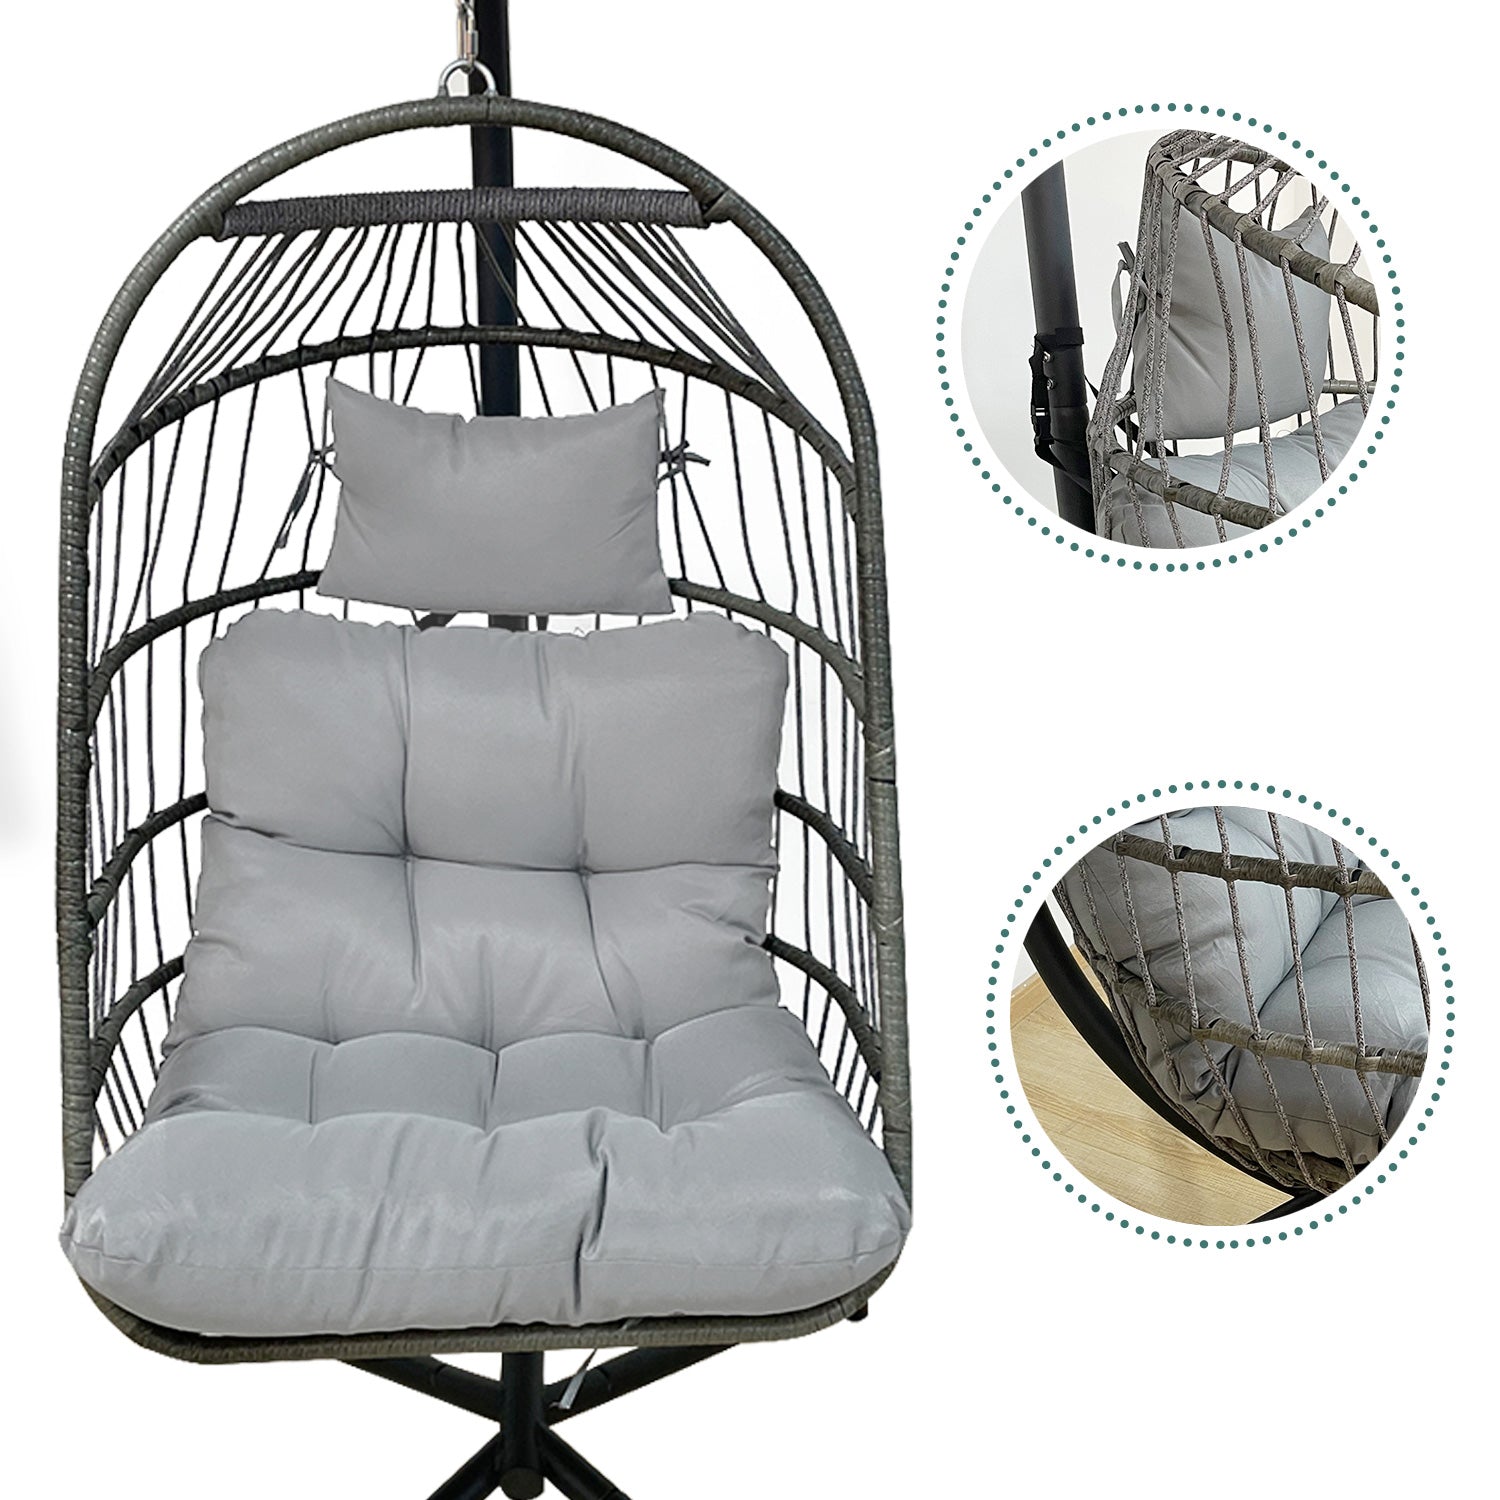 Hanging Egg Chair with Head Pillow and Large Seat Cushion